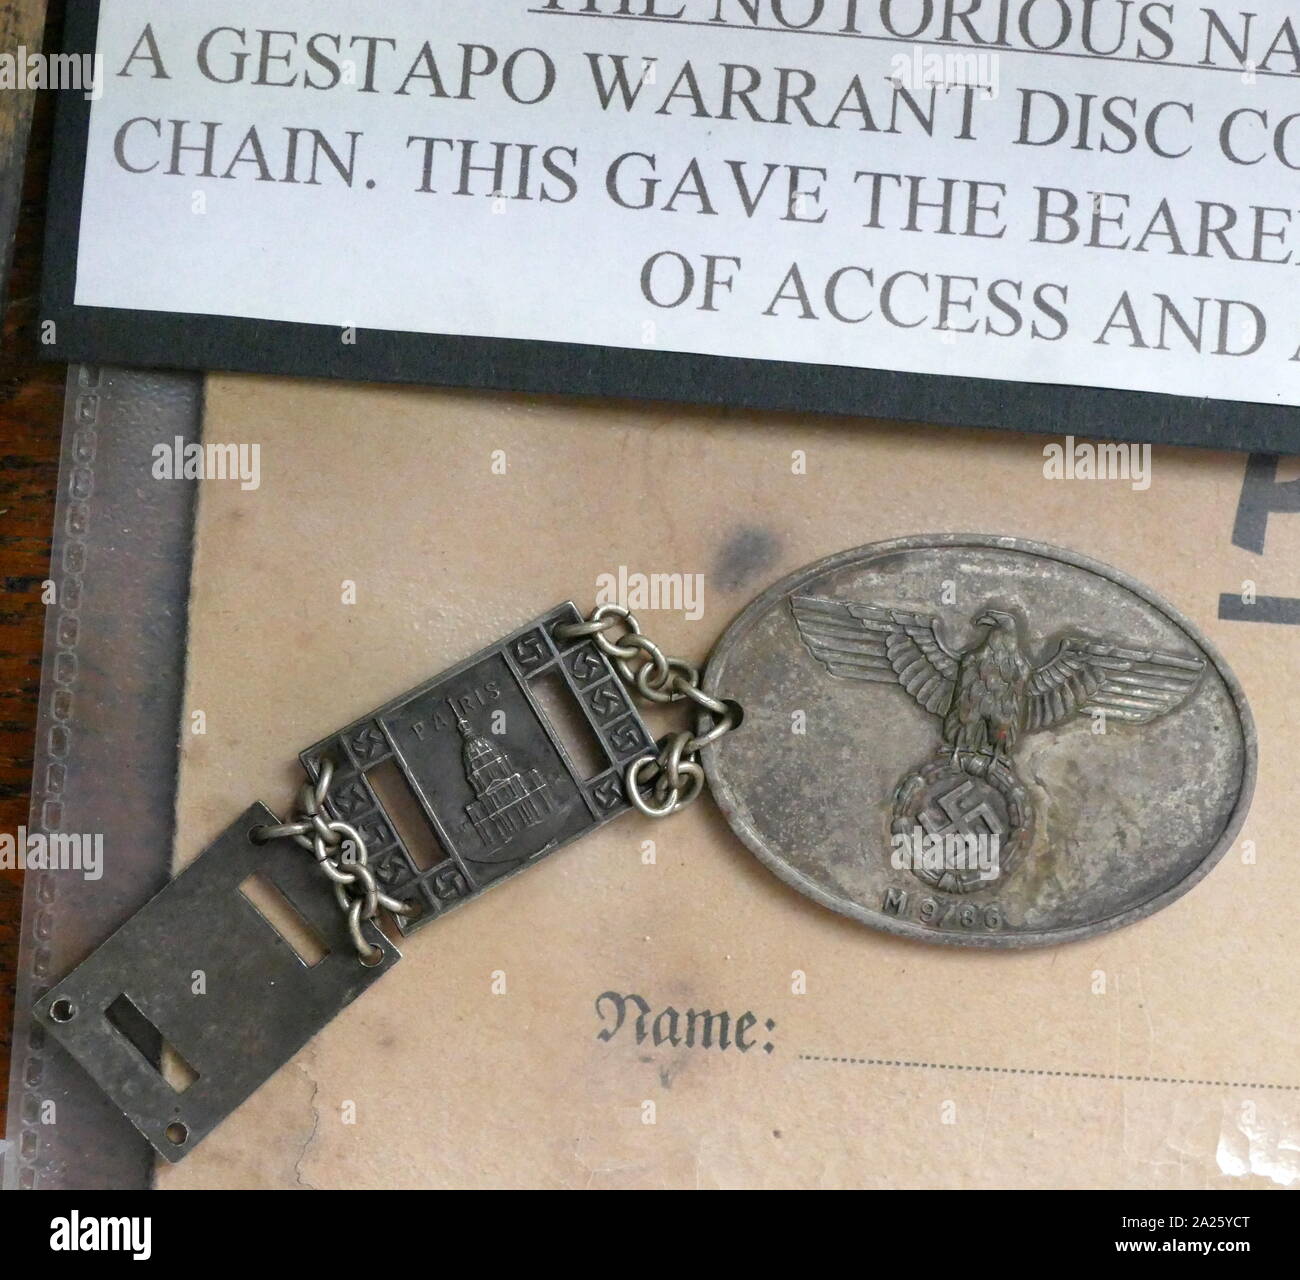 Warrant disc carried by officers of the Kriminalpolizei during the Second World War Stock Photo